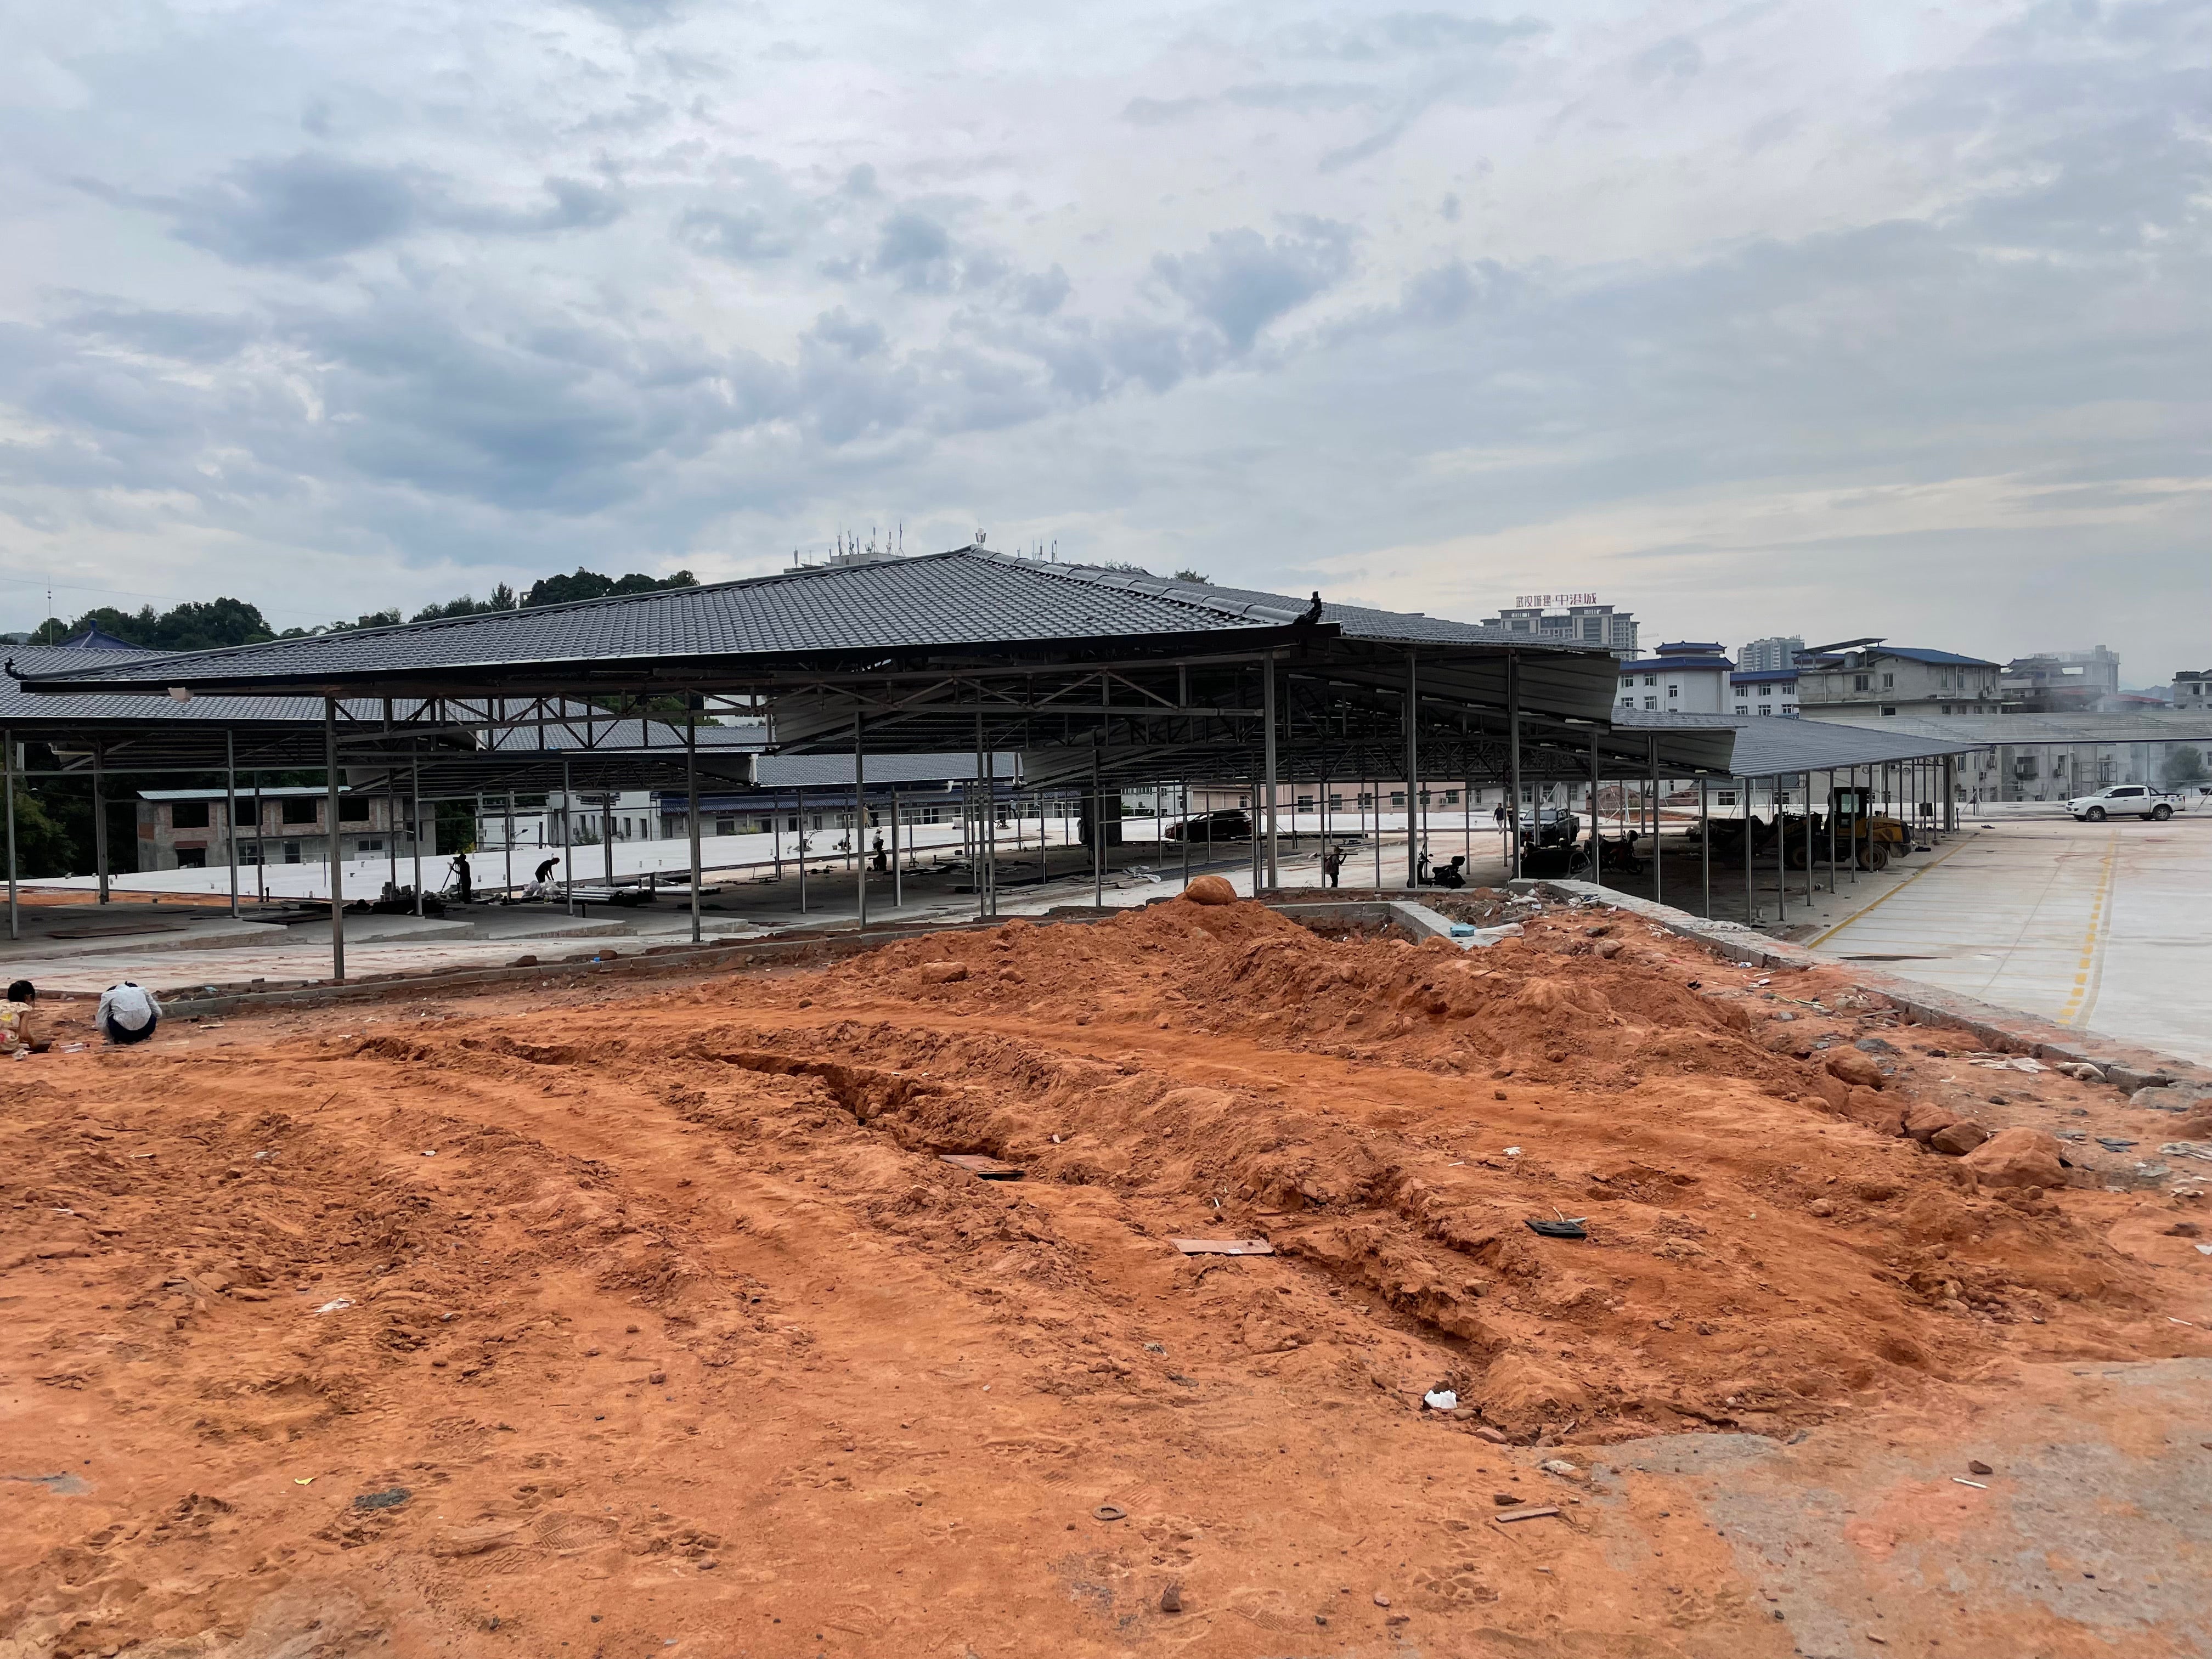 A new community market under construction in Enshi city. At least six were permanently shut down during the first three months of 2020